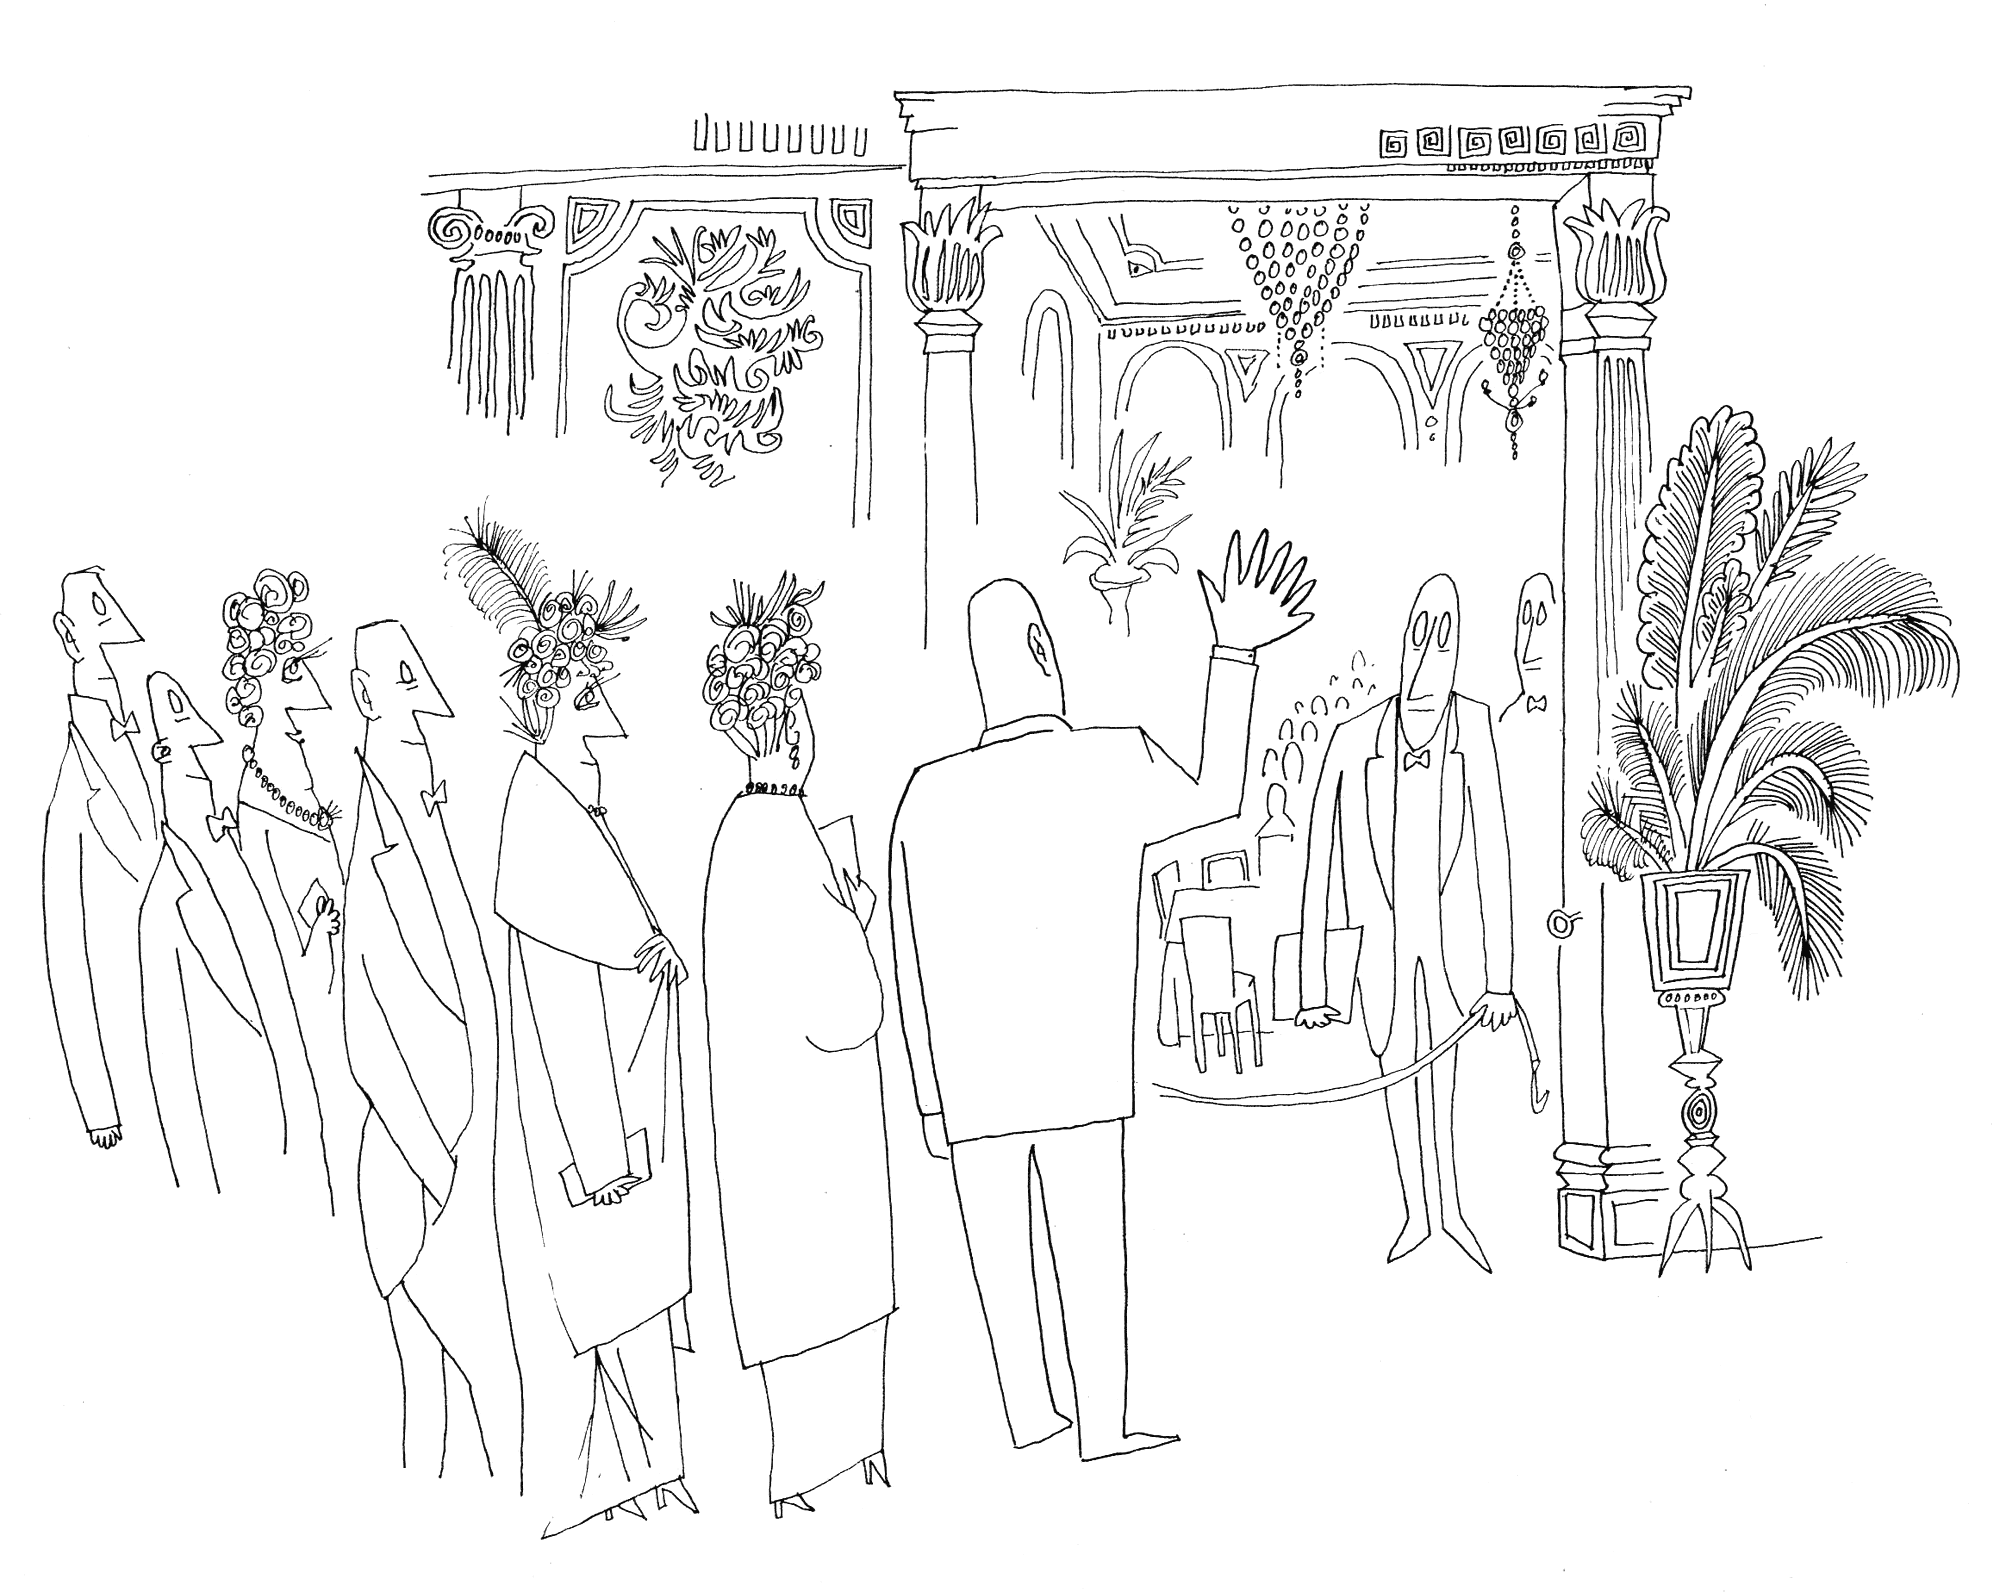 Drawing in <em>The New Yorker</em>, May 18, 1946.